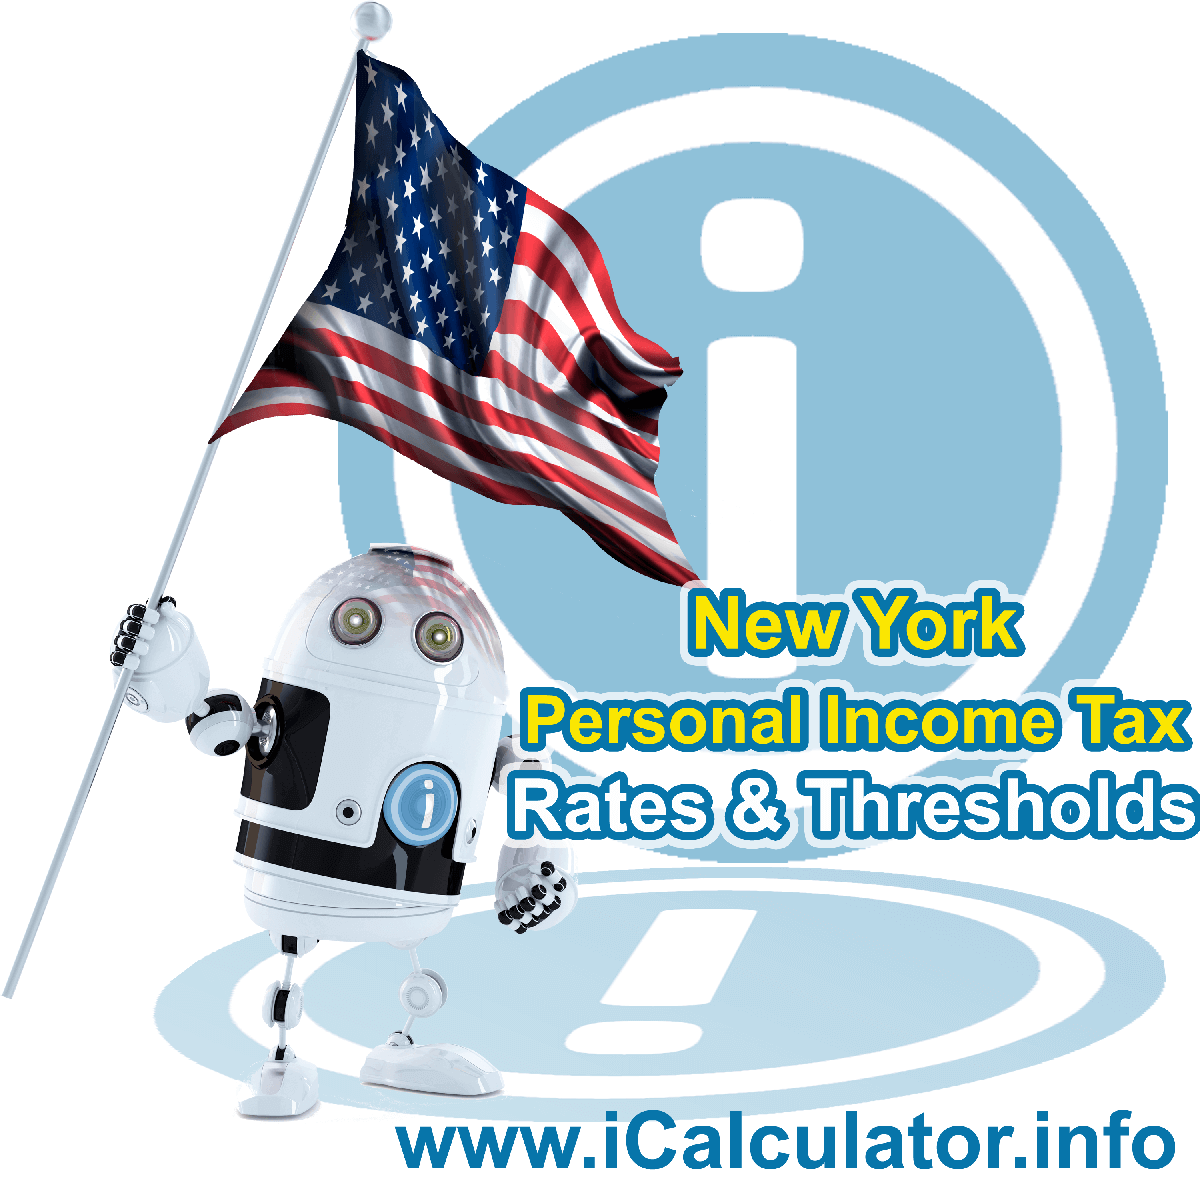 New York State Tax Tables 2020. This image displays details of the New York State Tax Tables for the 2020 tax return year which is provided in support of the 2020 US Tax Calculator